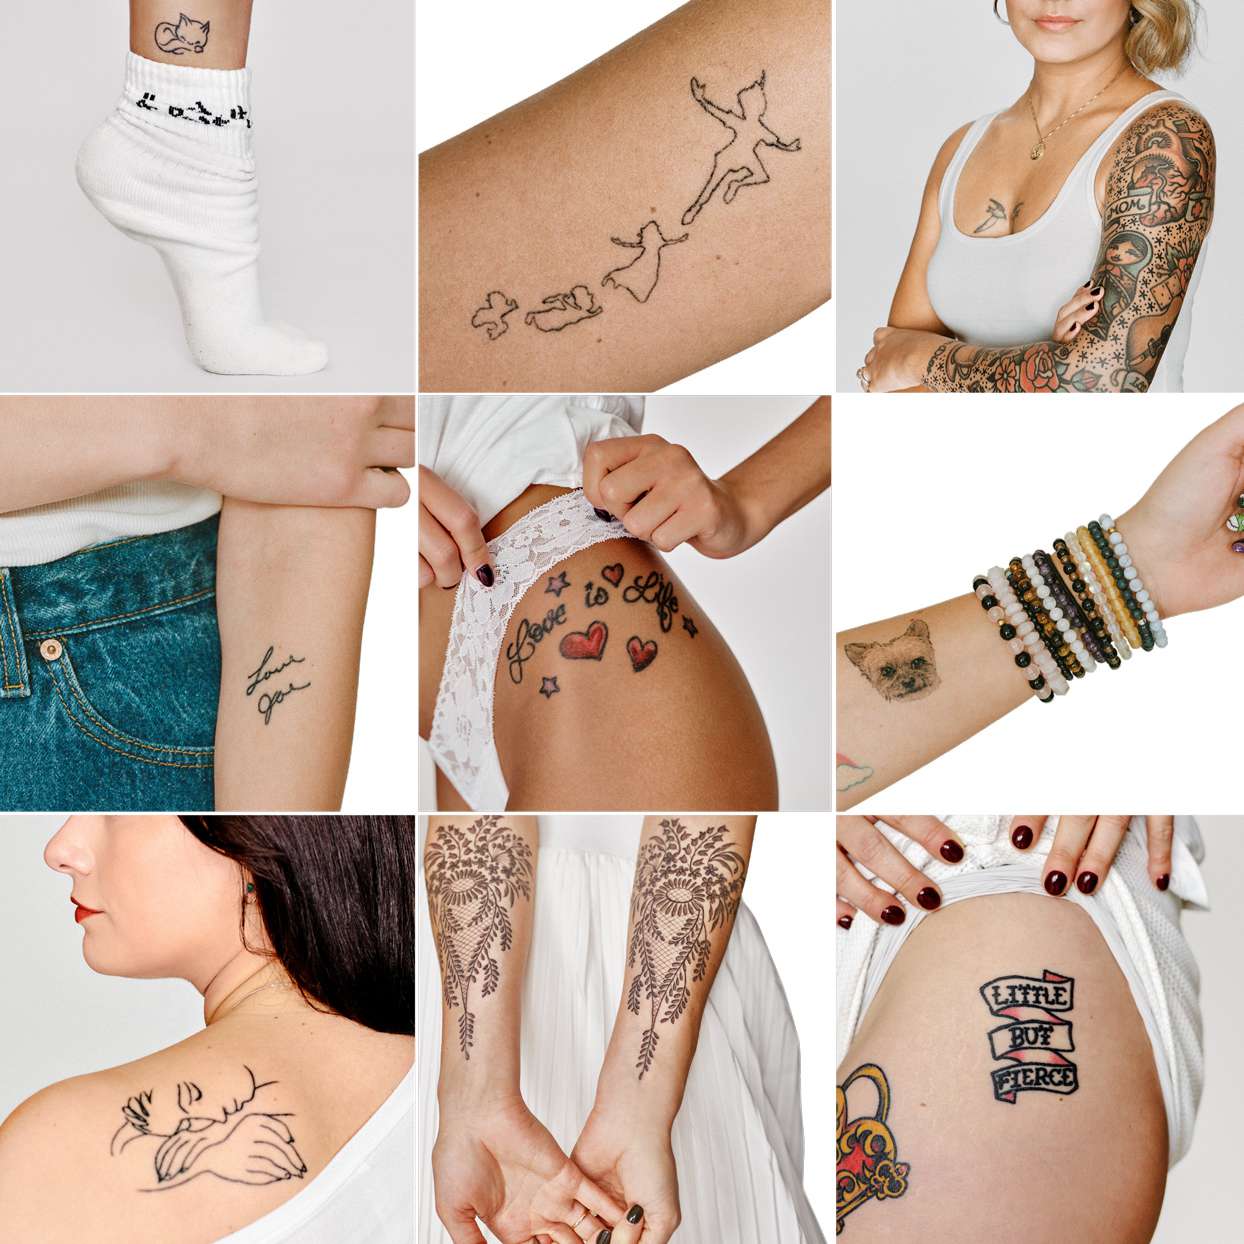 self-love tattoos inspiration and stories